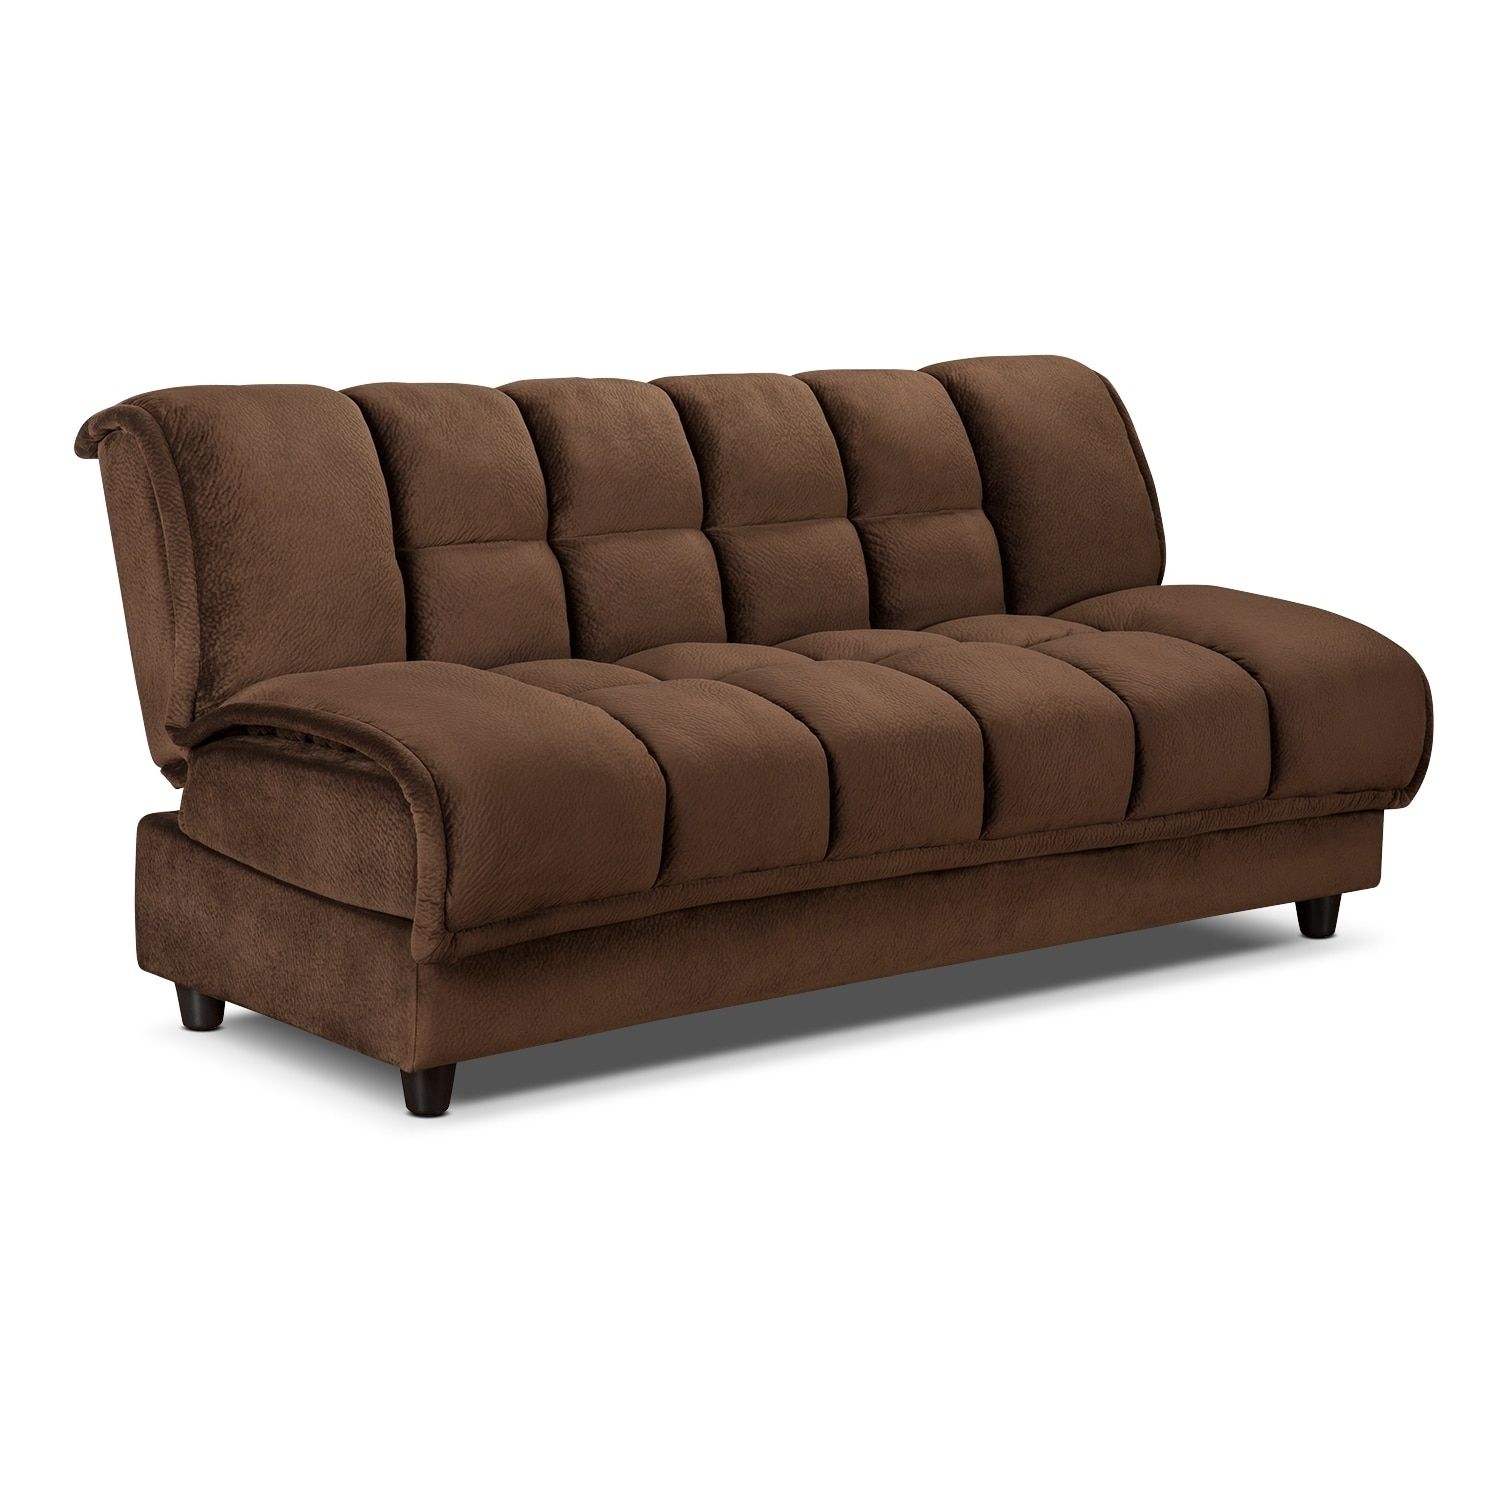 Furniture: Cheap Sectional Sofas Under 300 | Costco Couches Regarding Tallahassee Sectional Sofas (Photo 6 of 10)